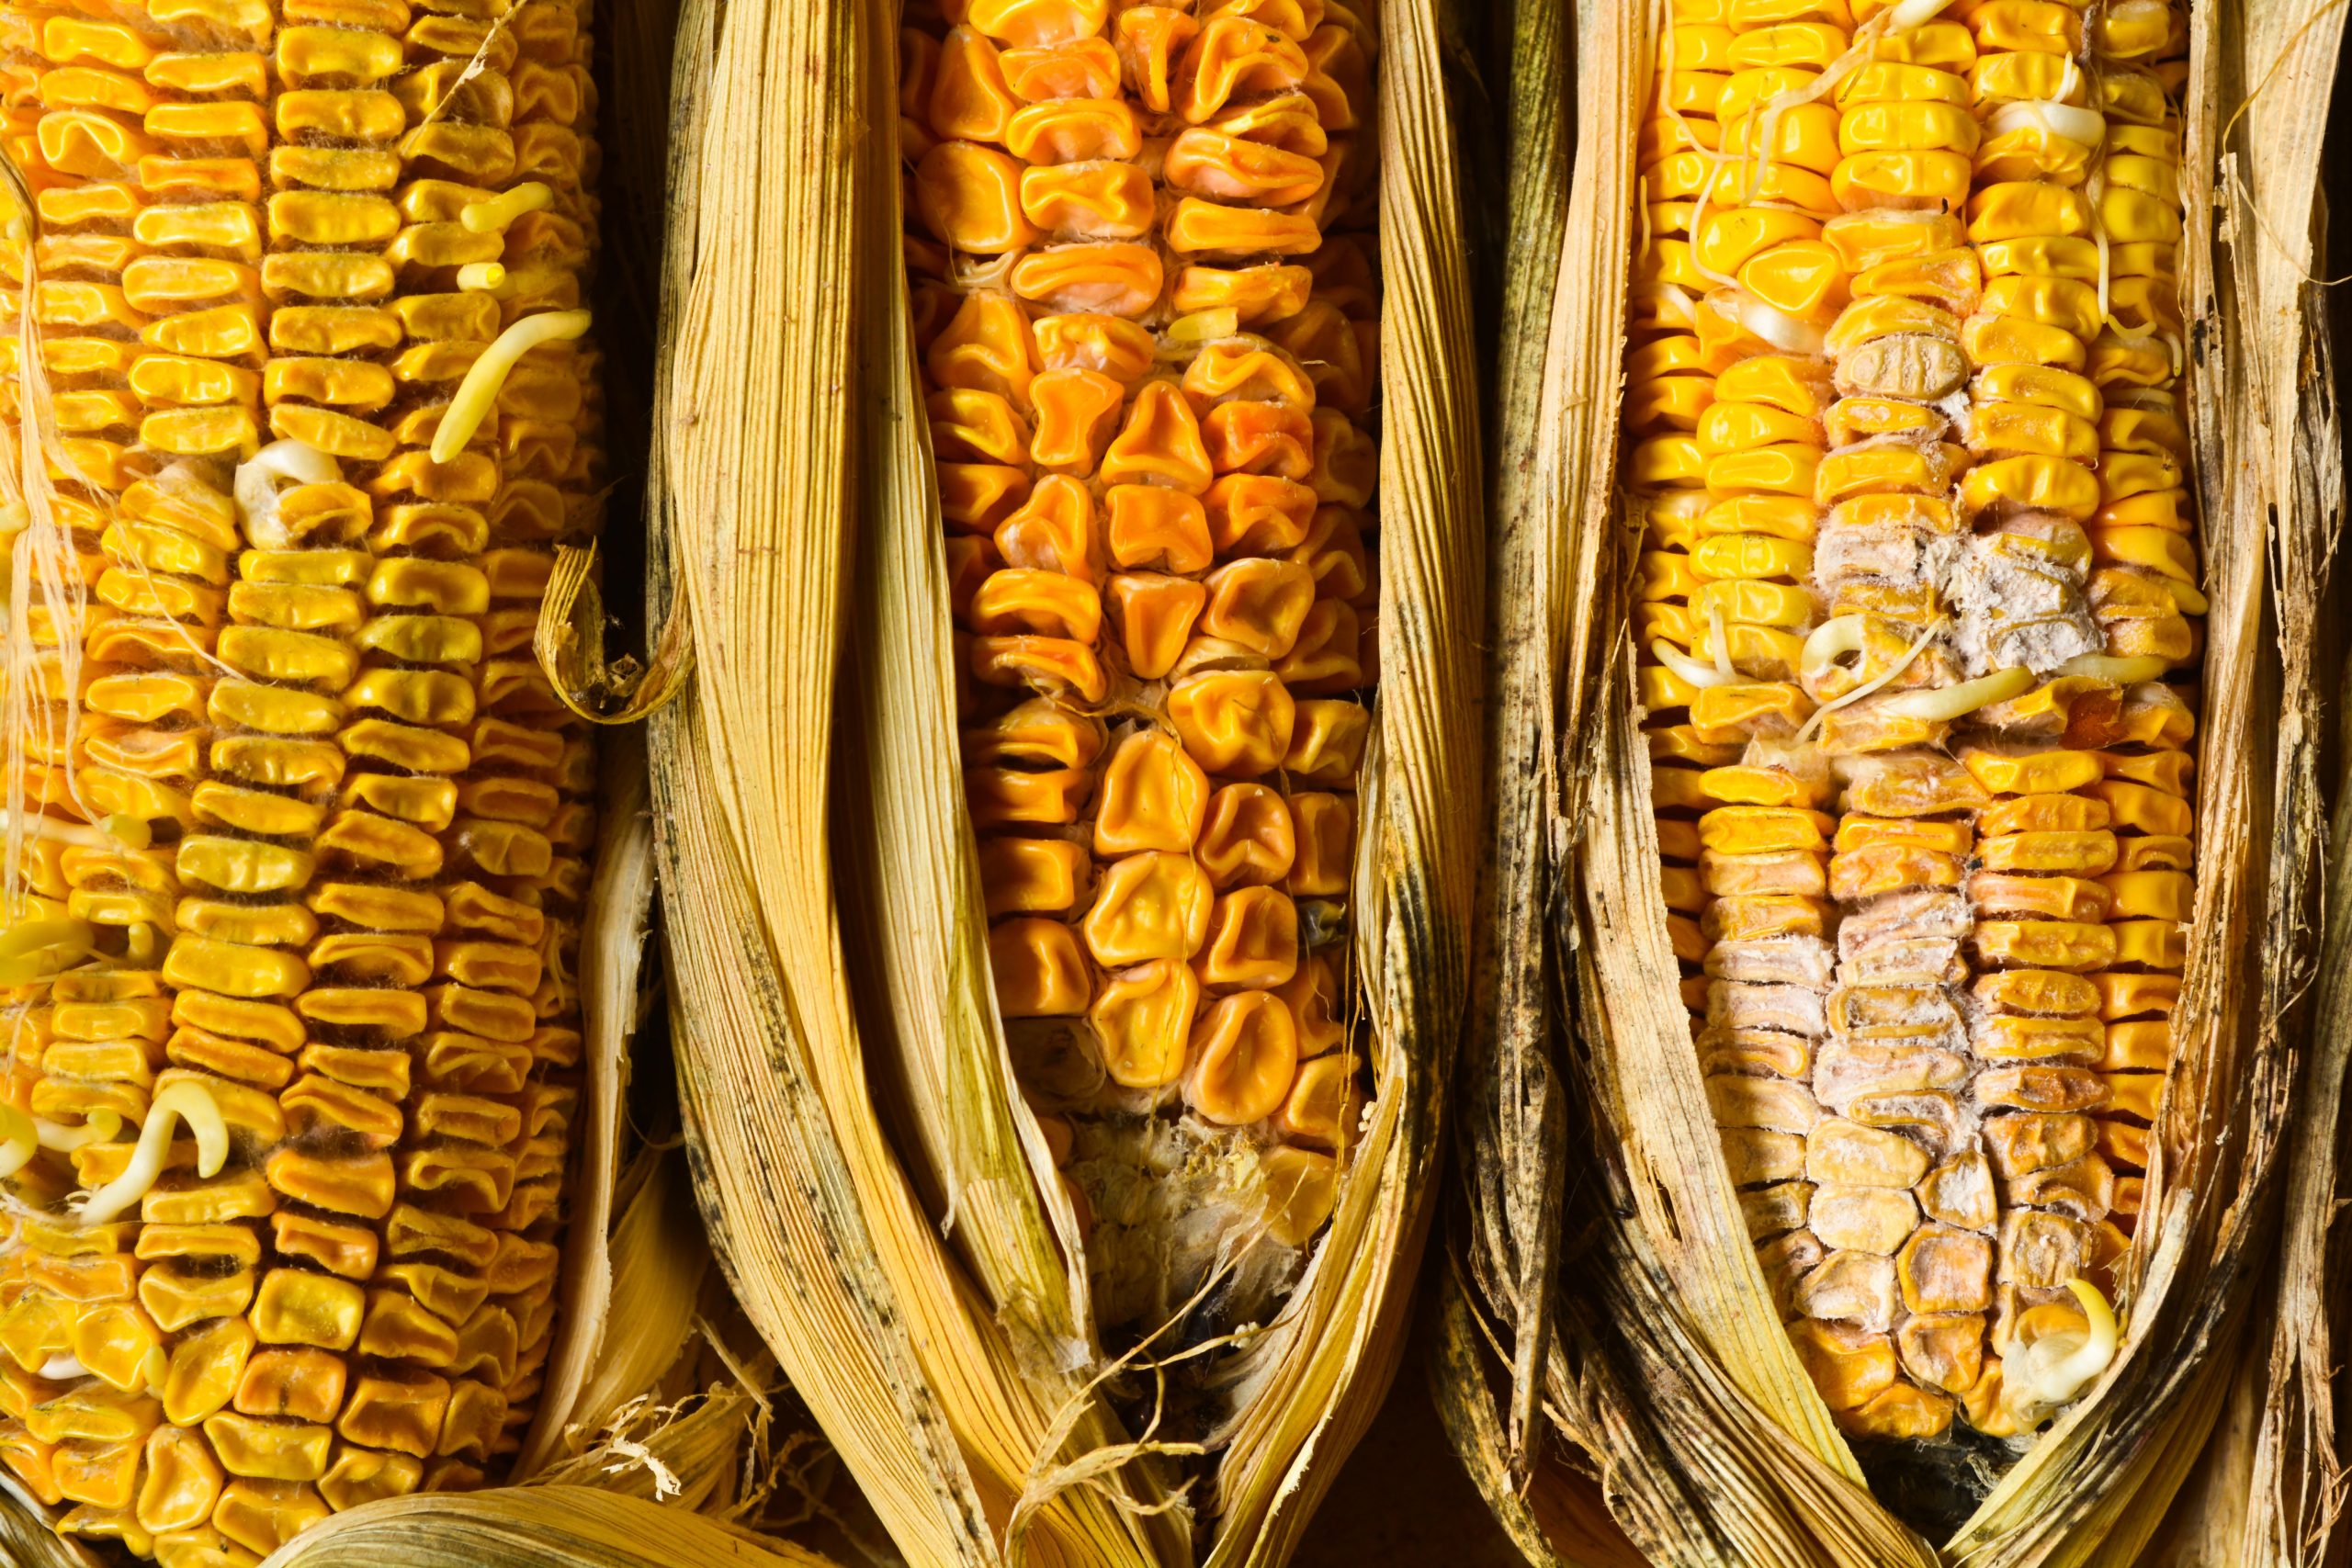 New data shows mycotoxins are not under control